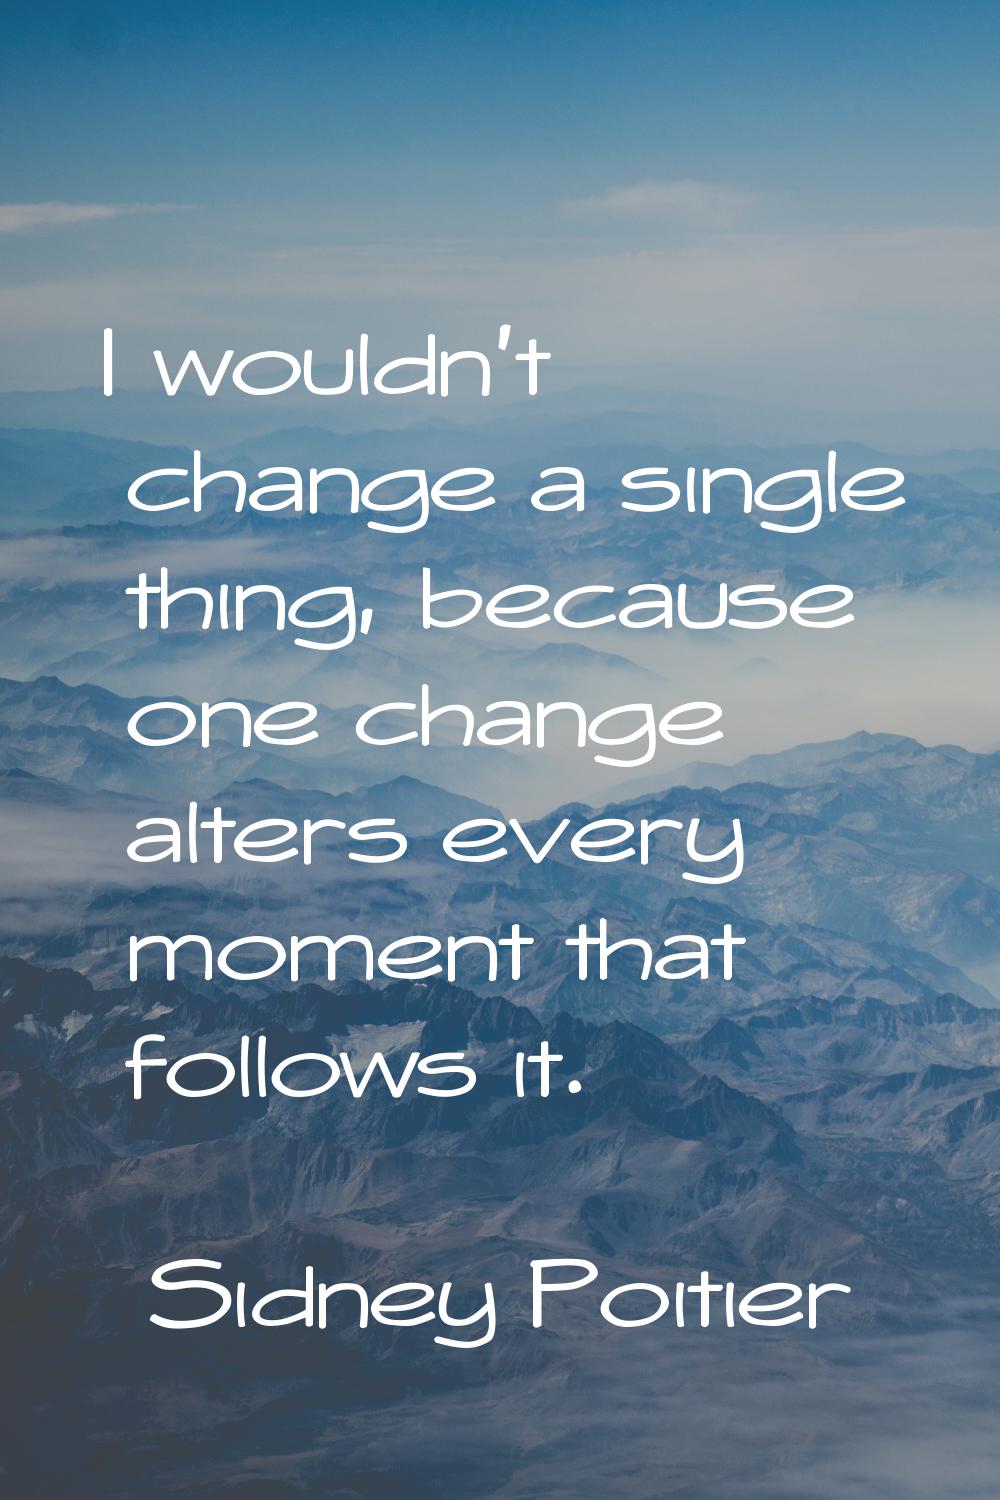 I wouldn't change a single thing, because one change alters every moment that follows it.